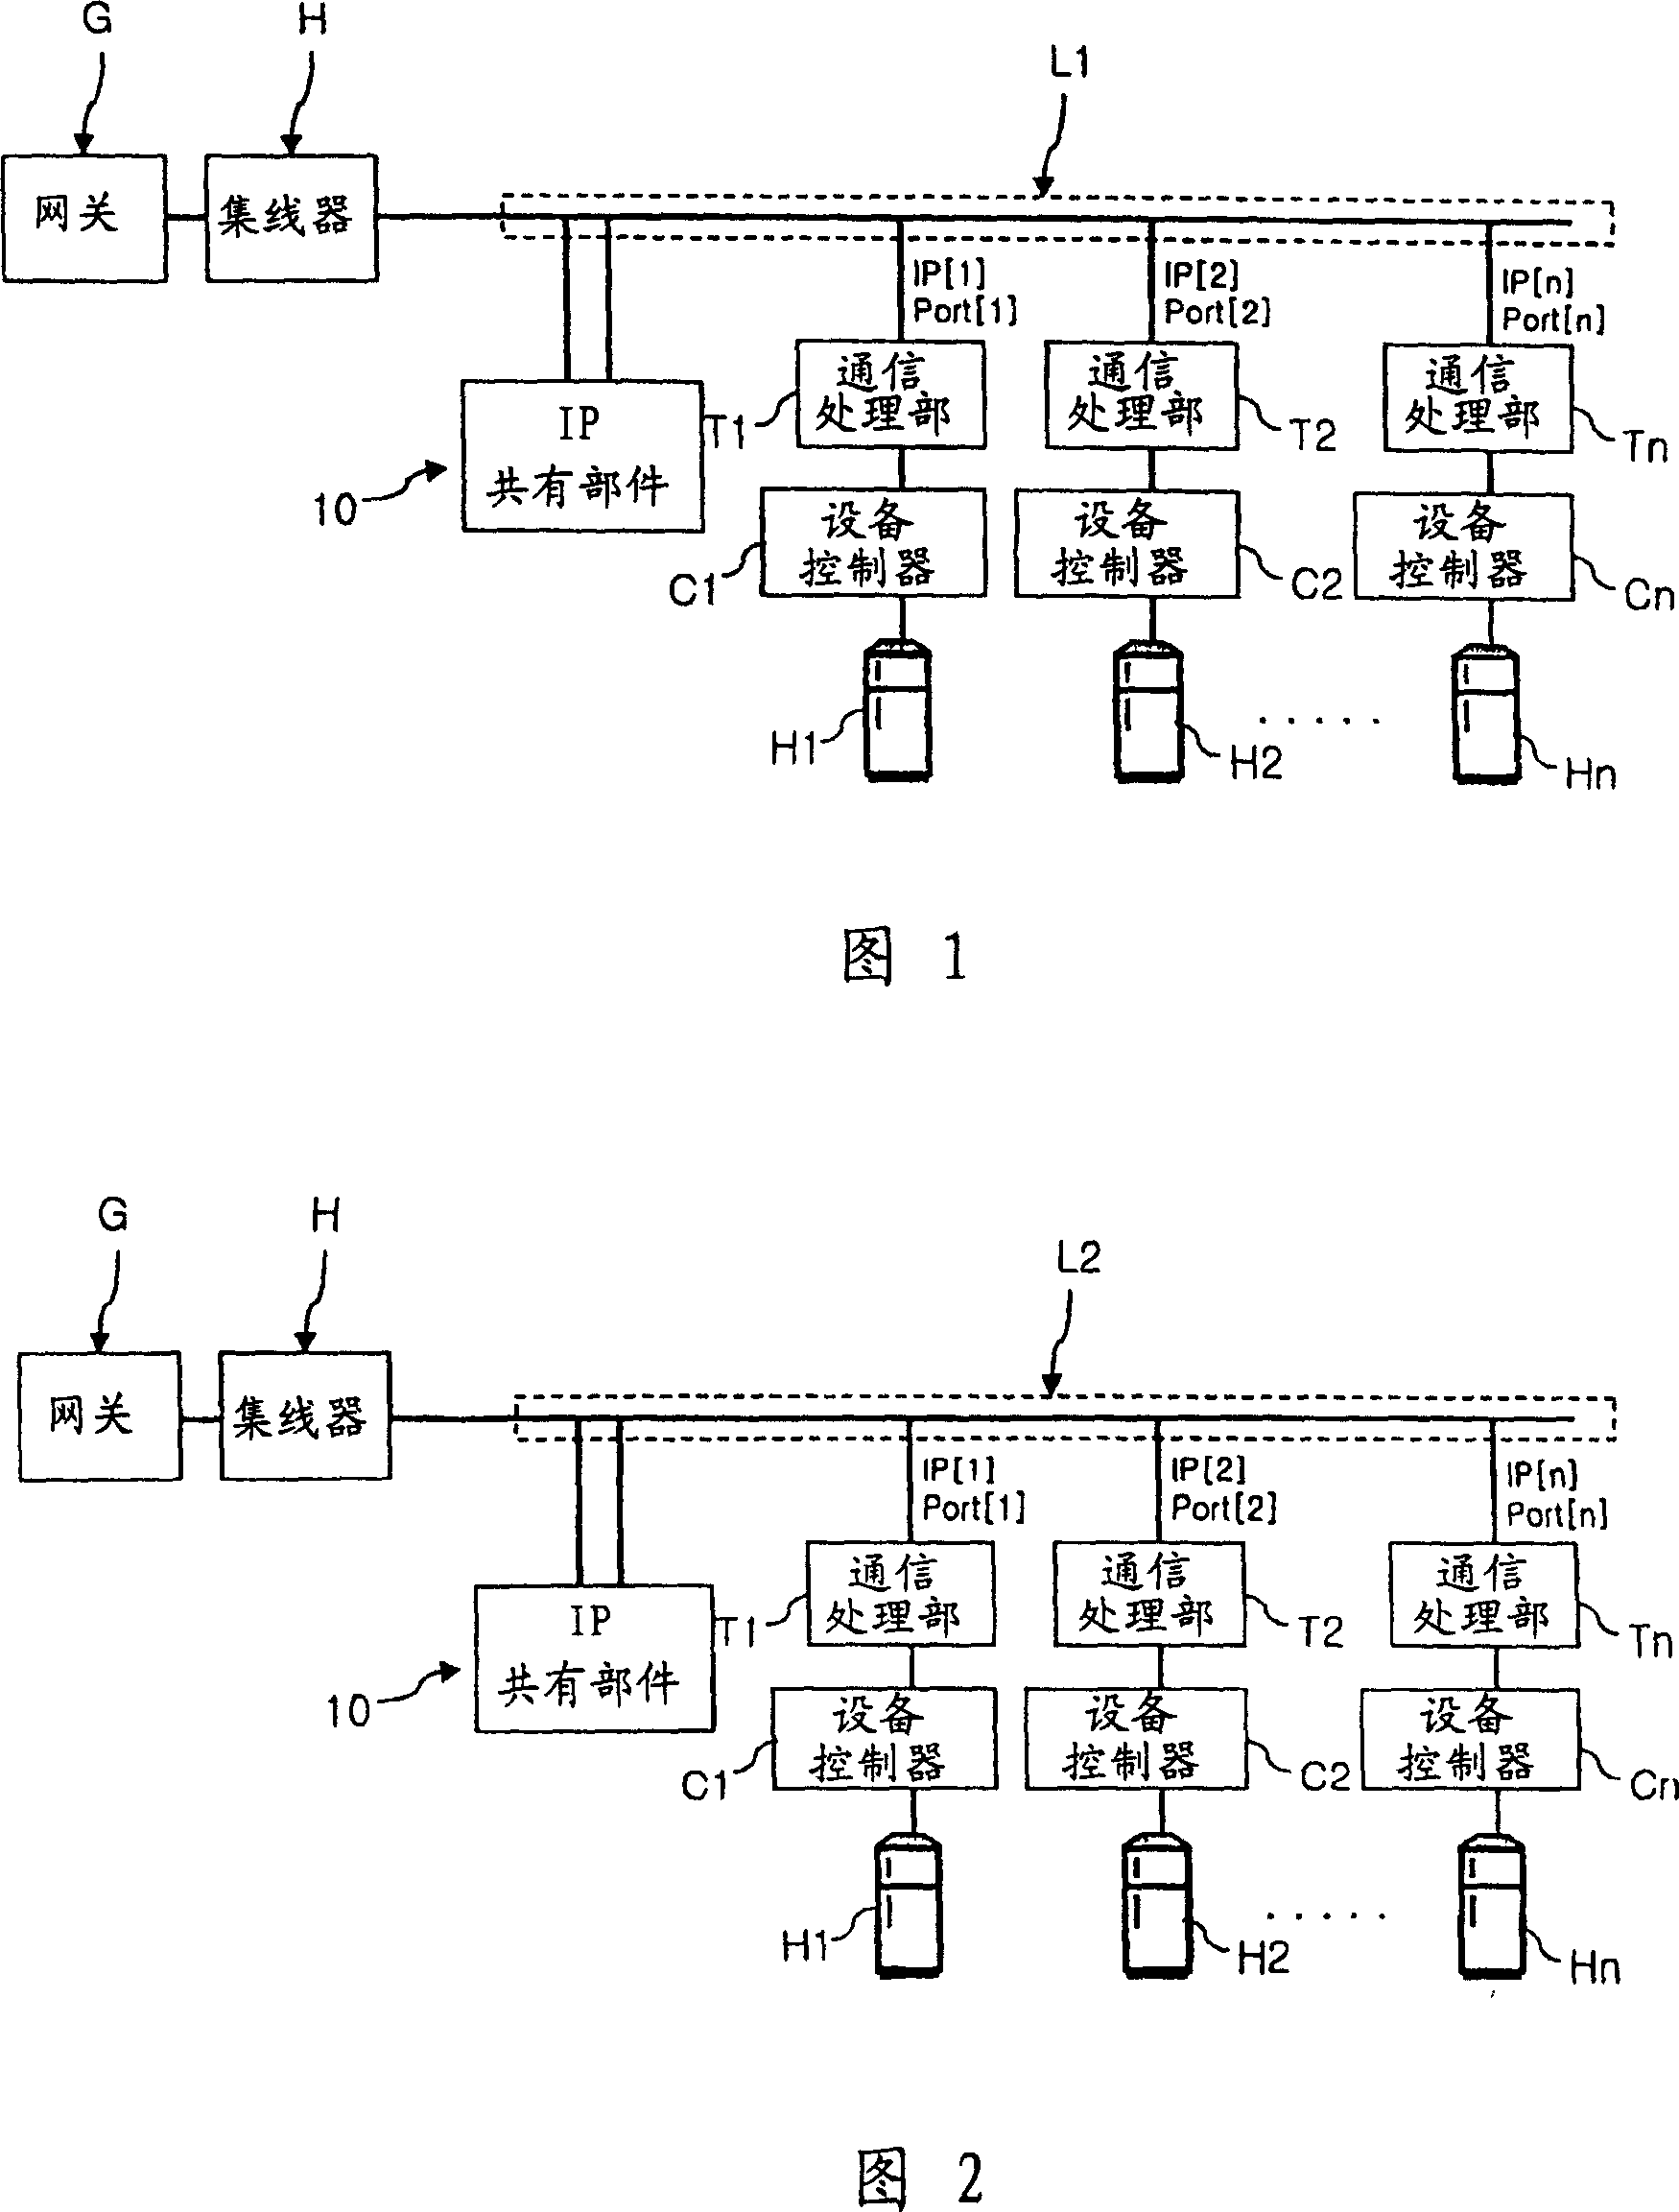 Domestic electrical equipment network system and its control method